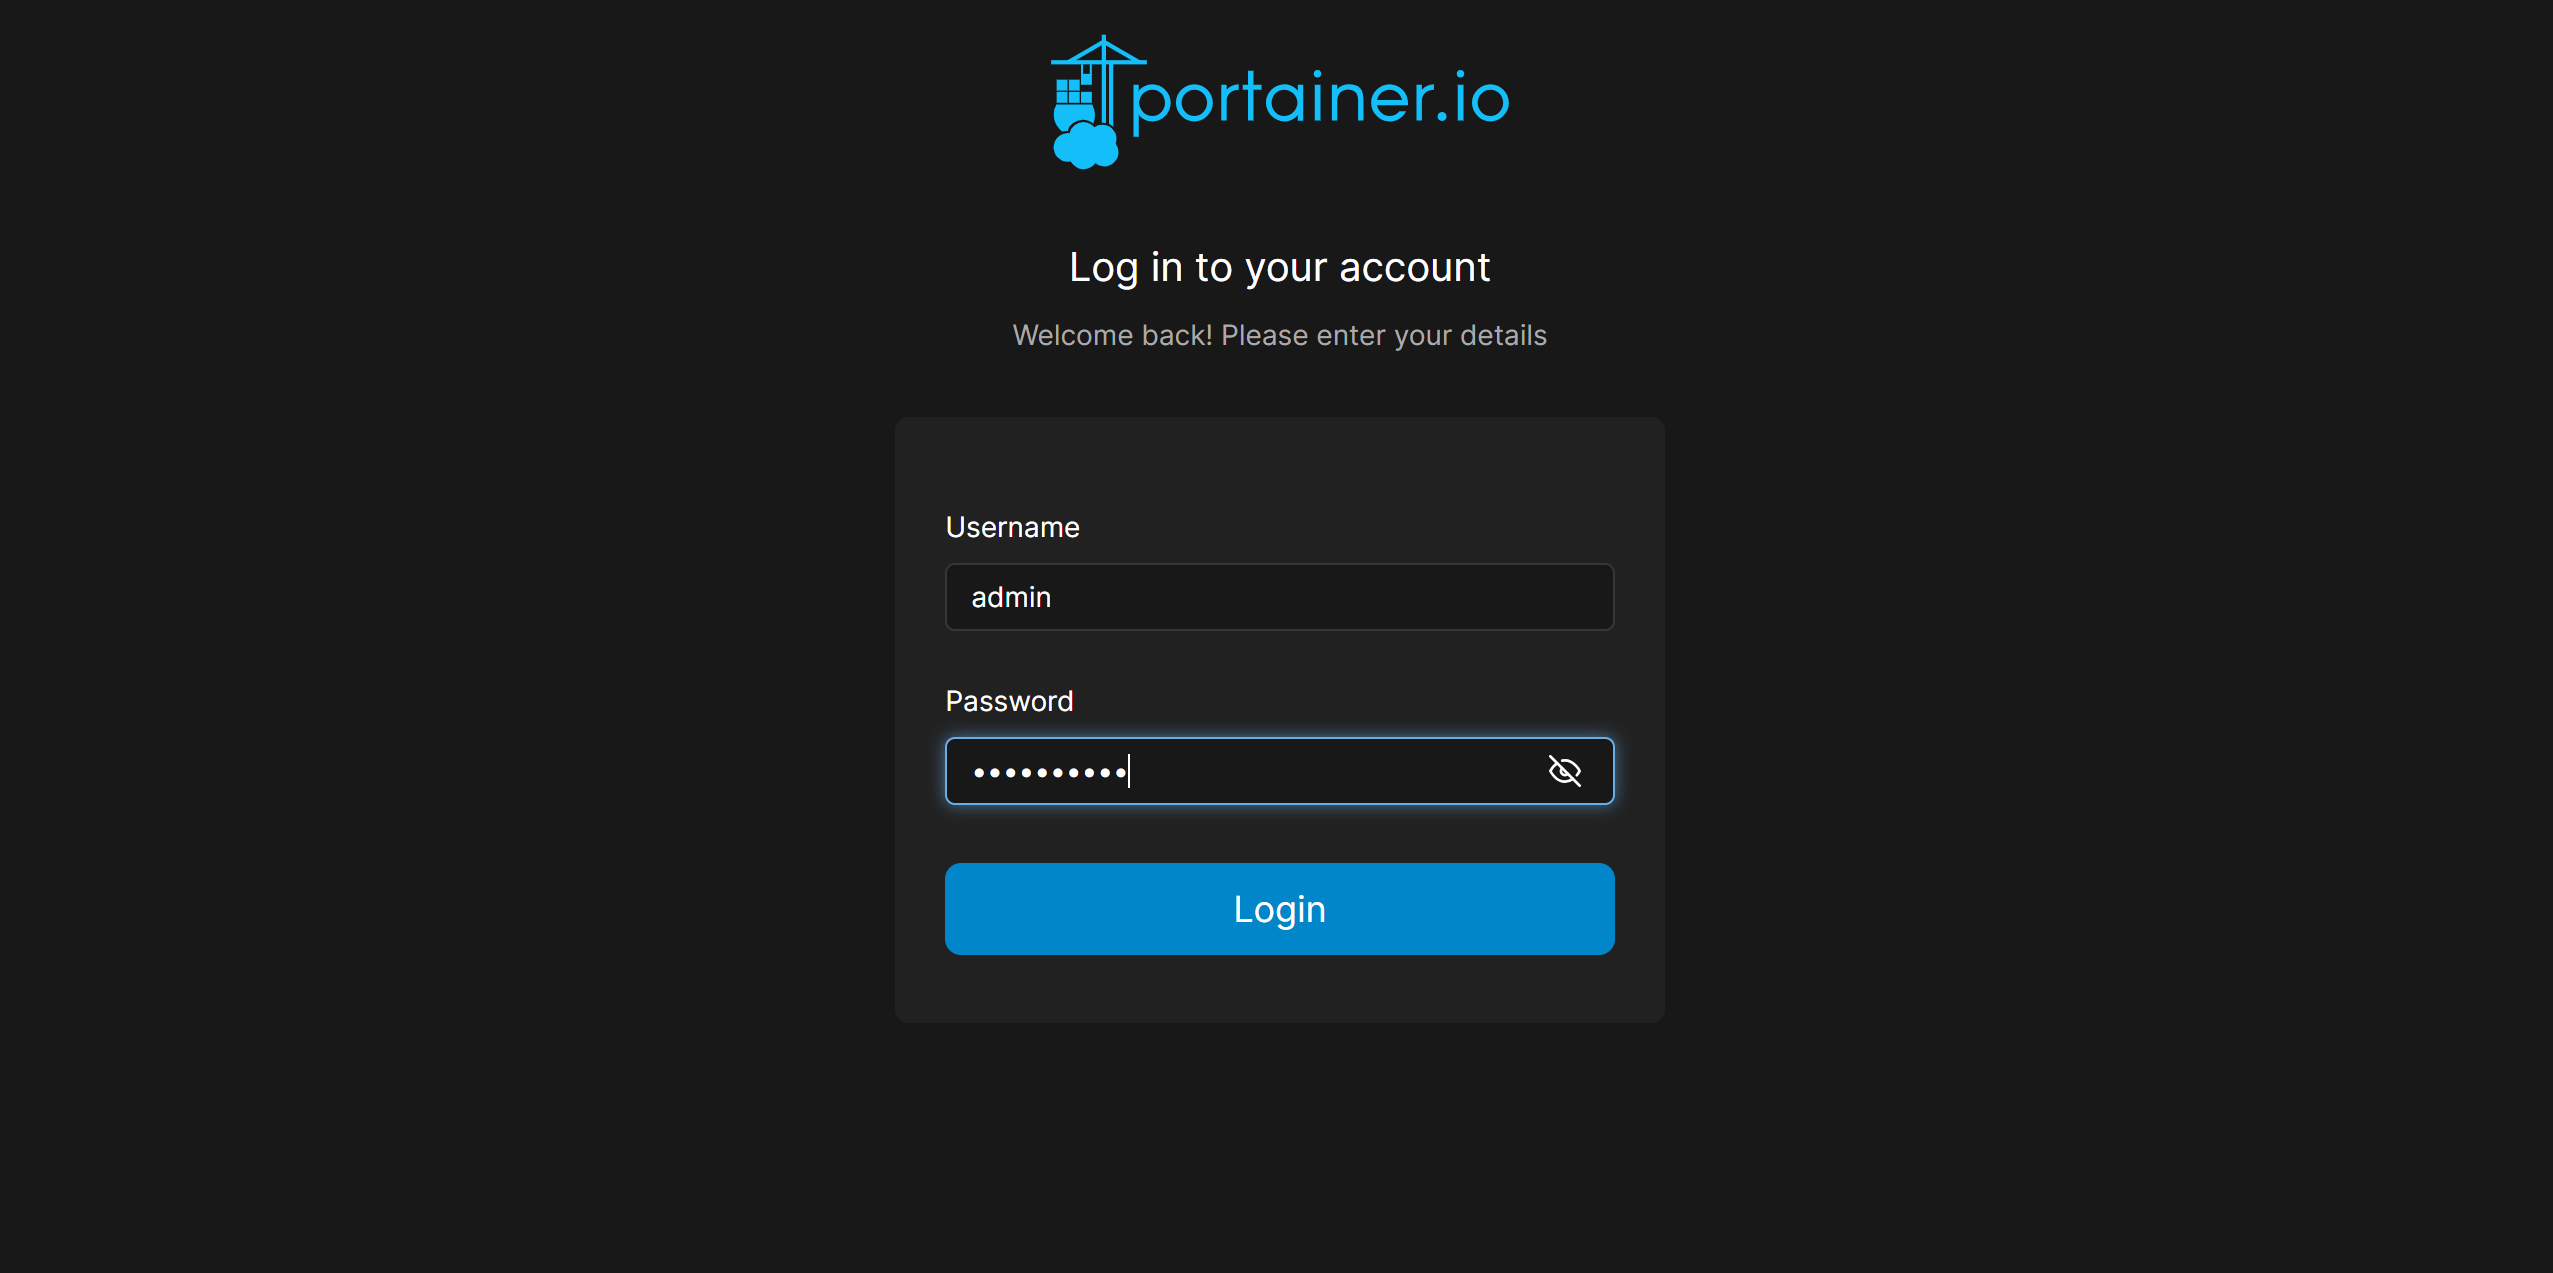 image: Portainer - Login page